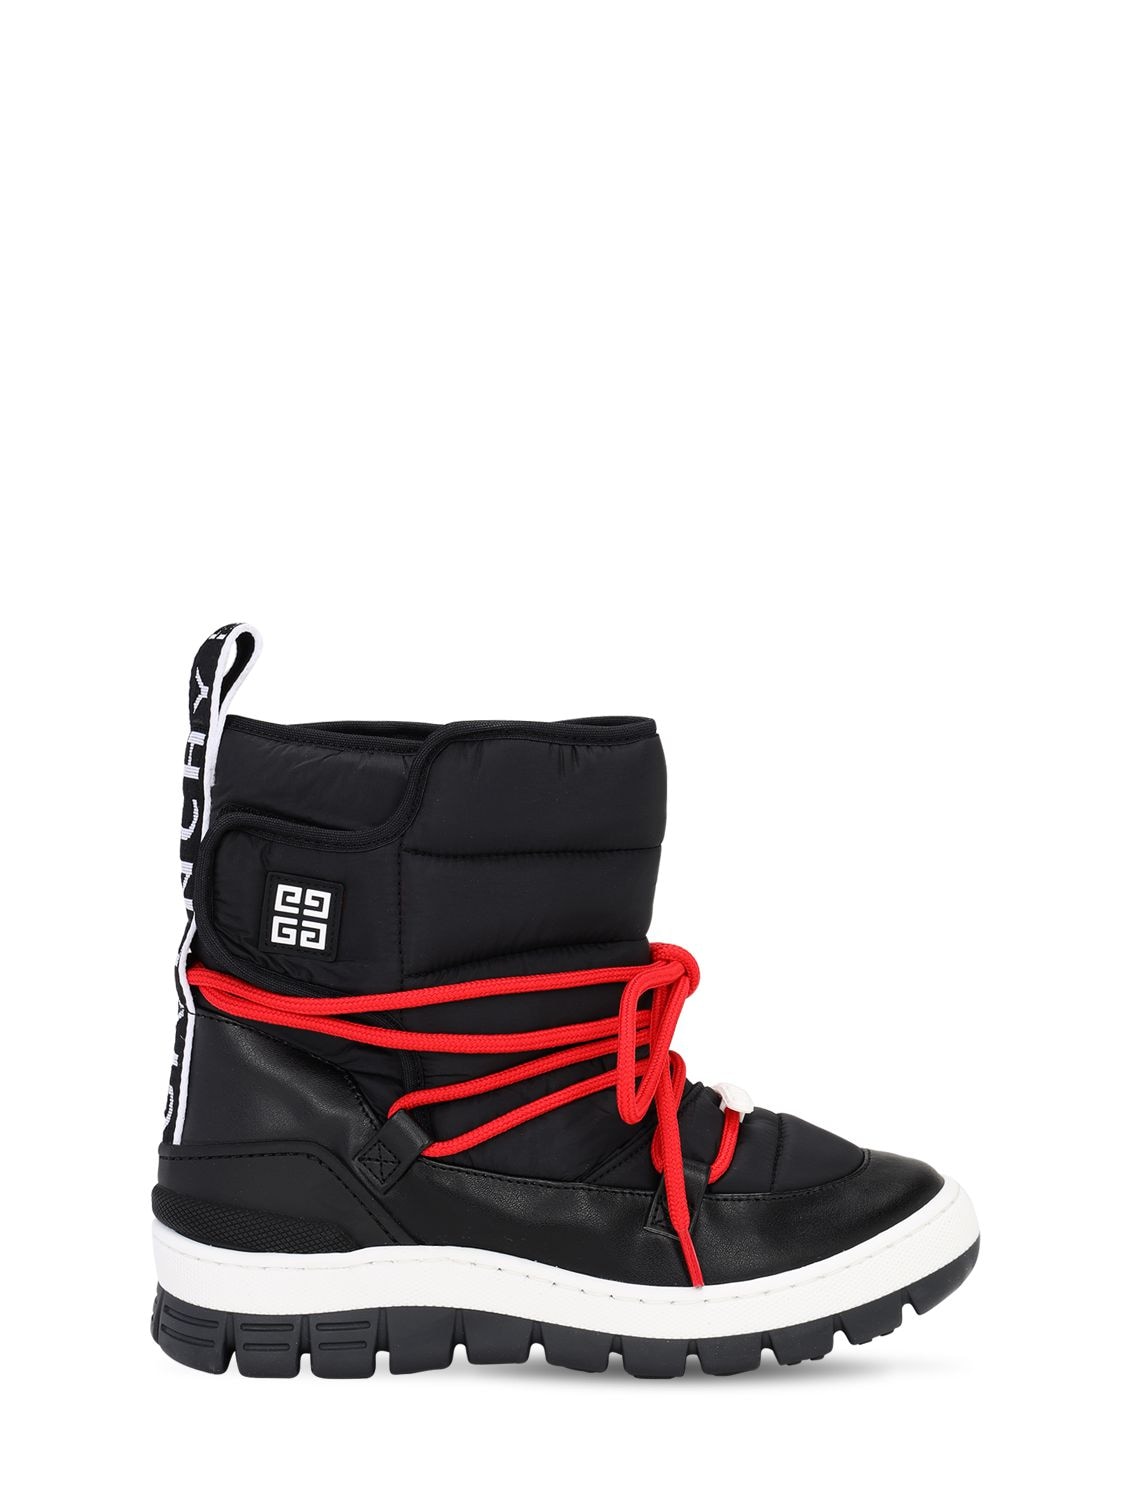 GIVENCHY WATER RESISTANT TECHNO SKI BOOTS,70IOFL081-MDLC0